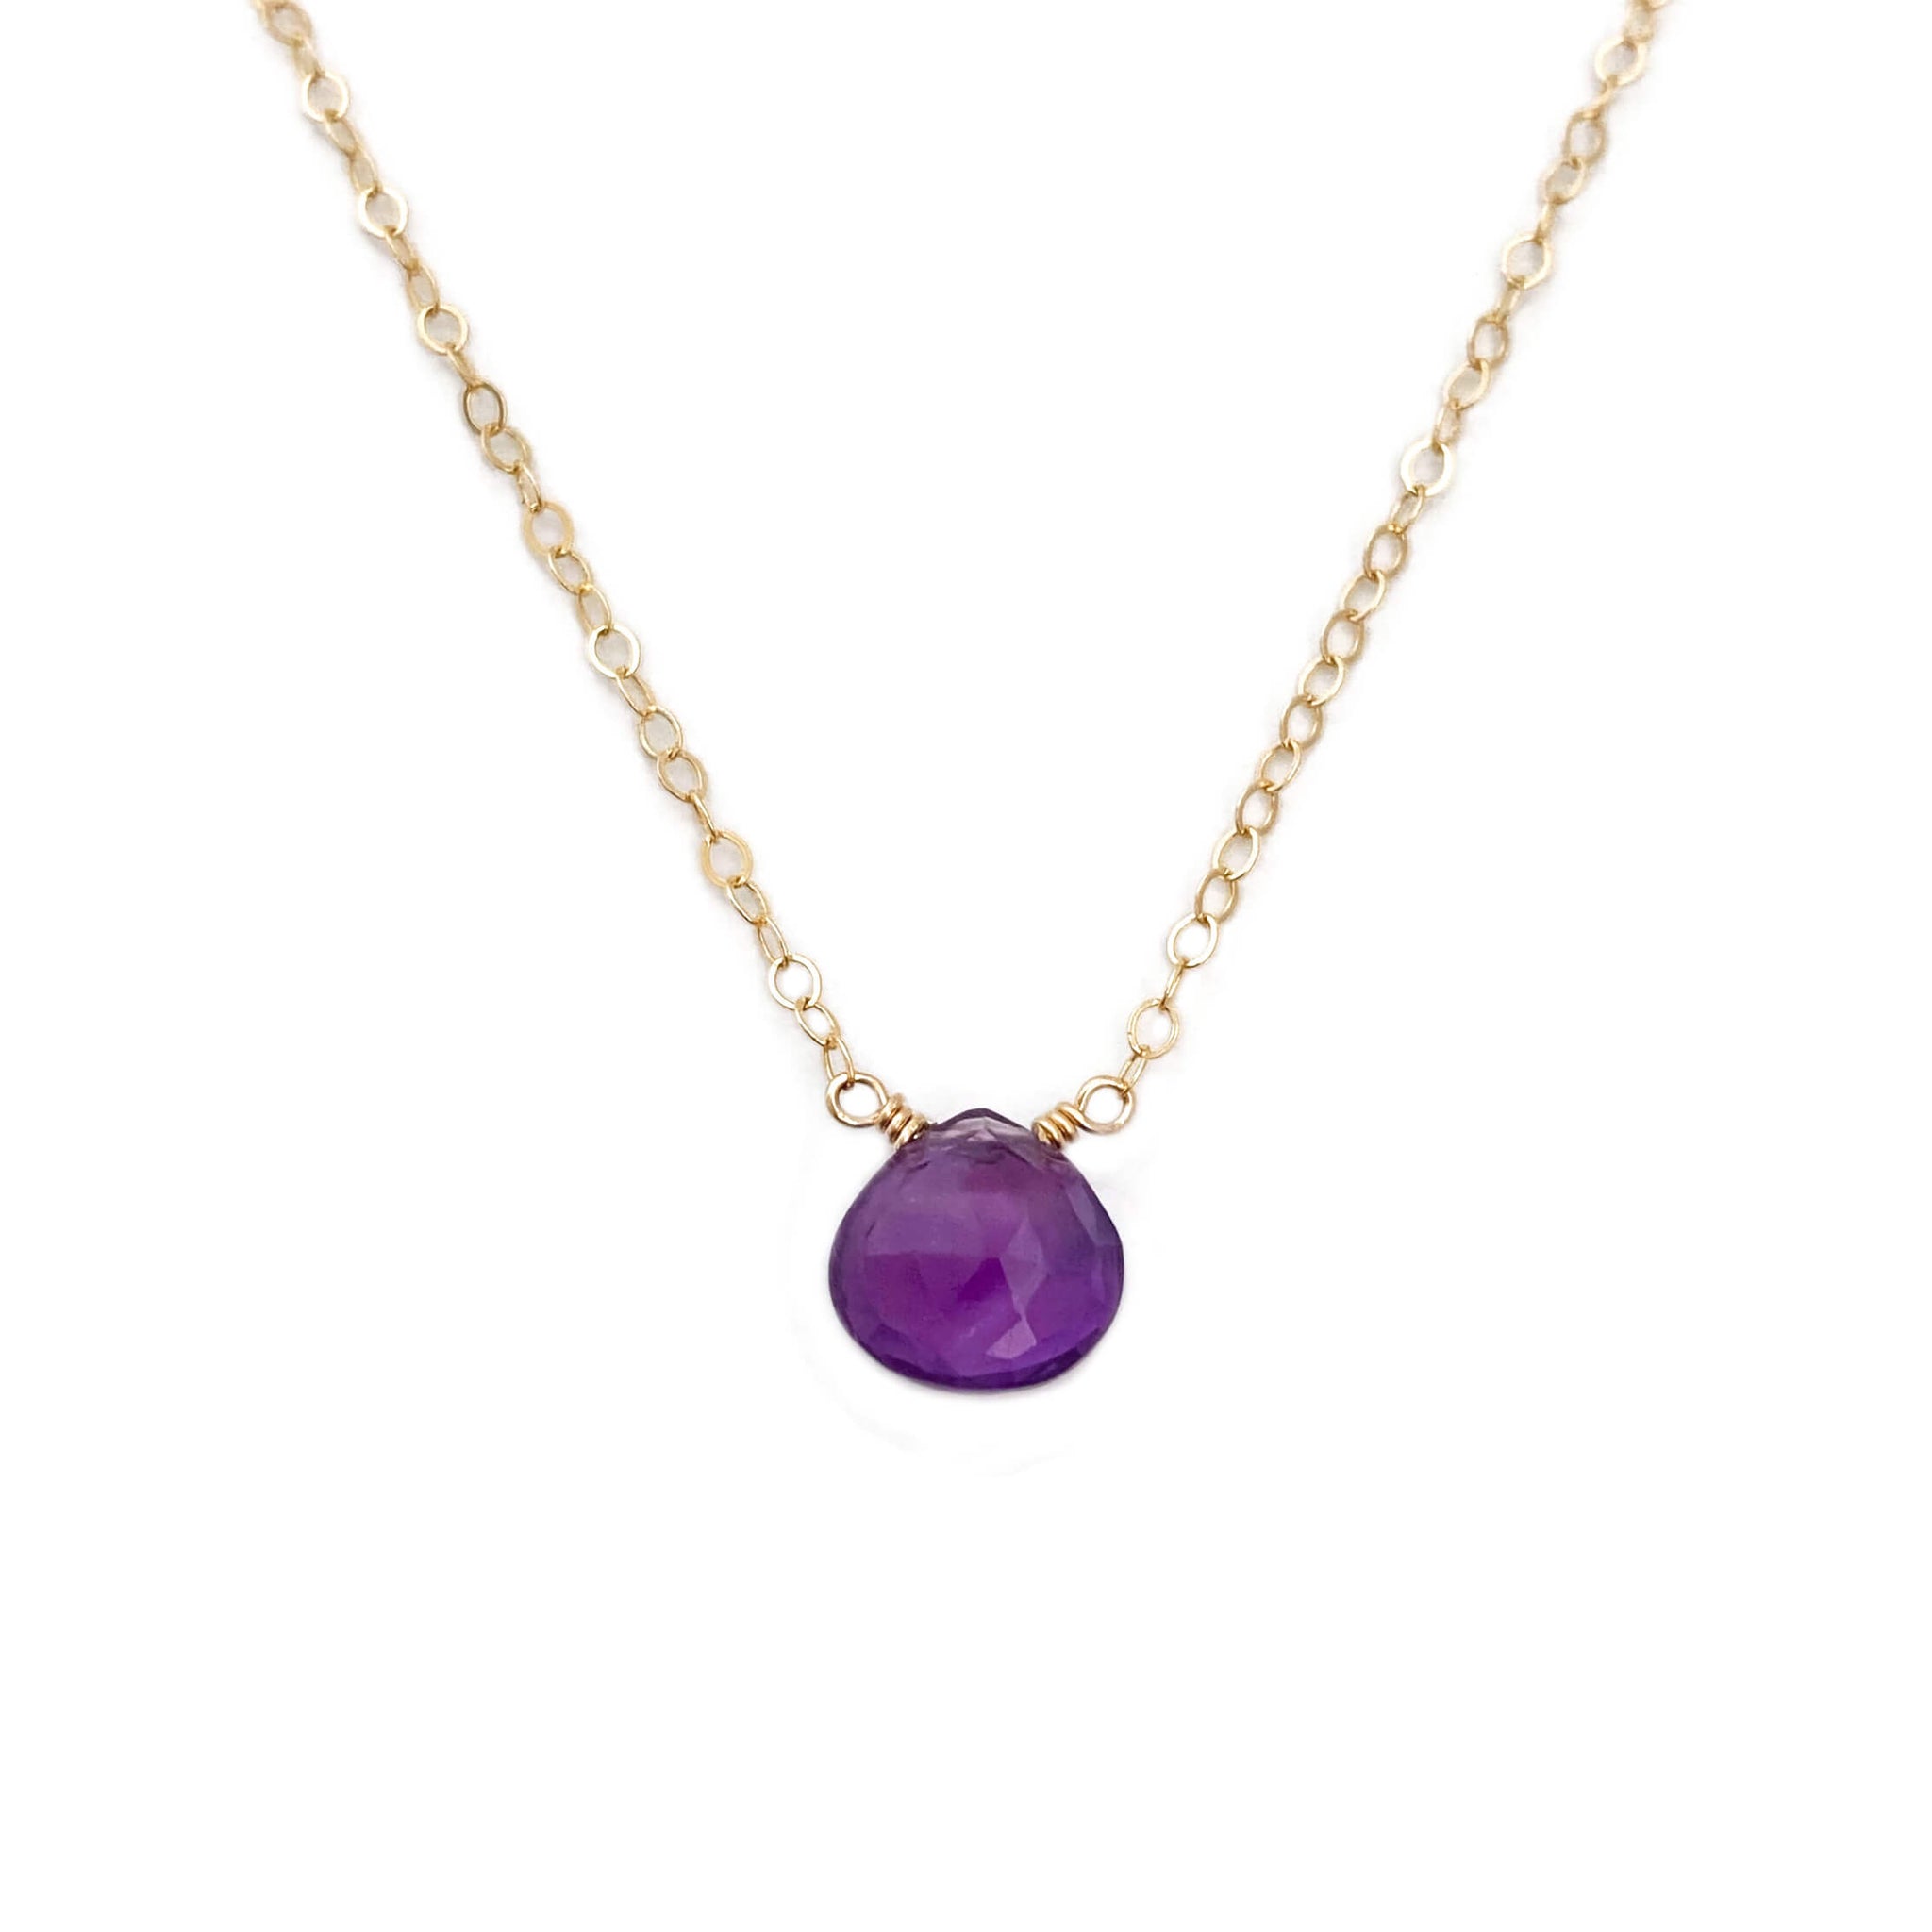 Dainty Amethyst necklace is made of real amethyst and 14k solid gold.  This Amethyst stone necklace can also be made in sterling silver or gold filled chain.